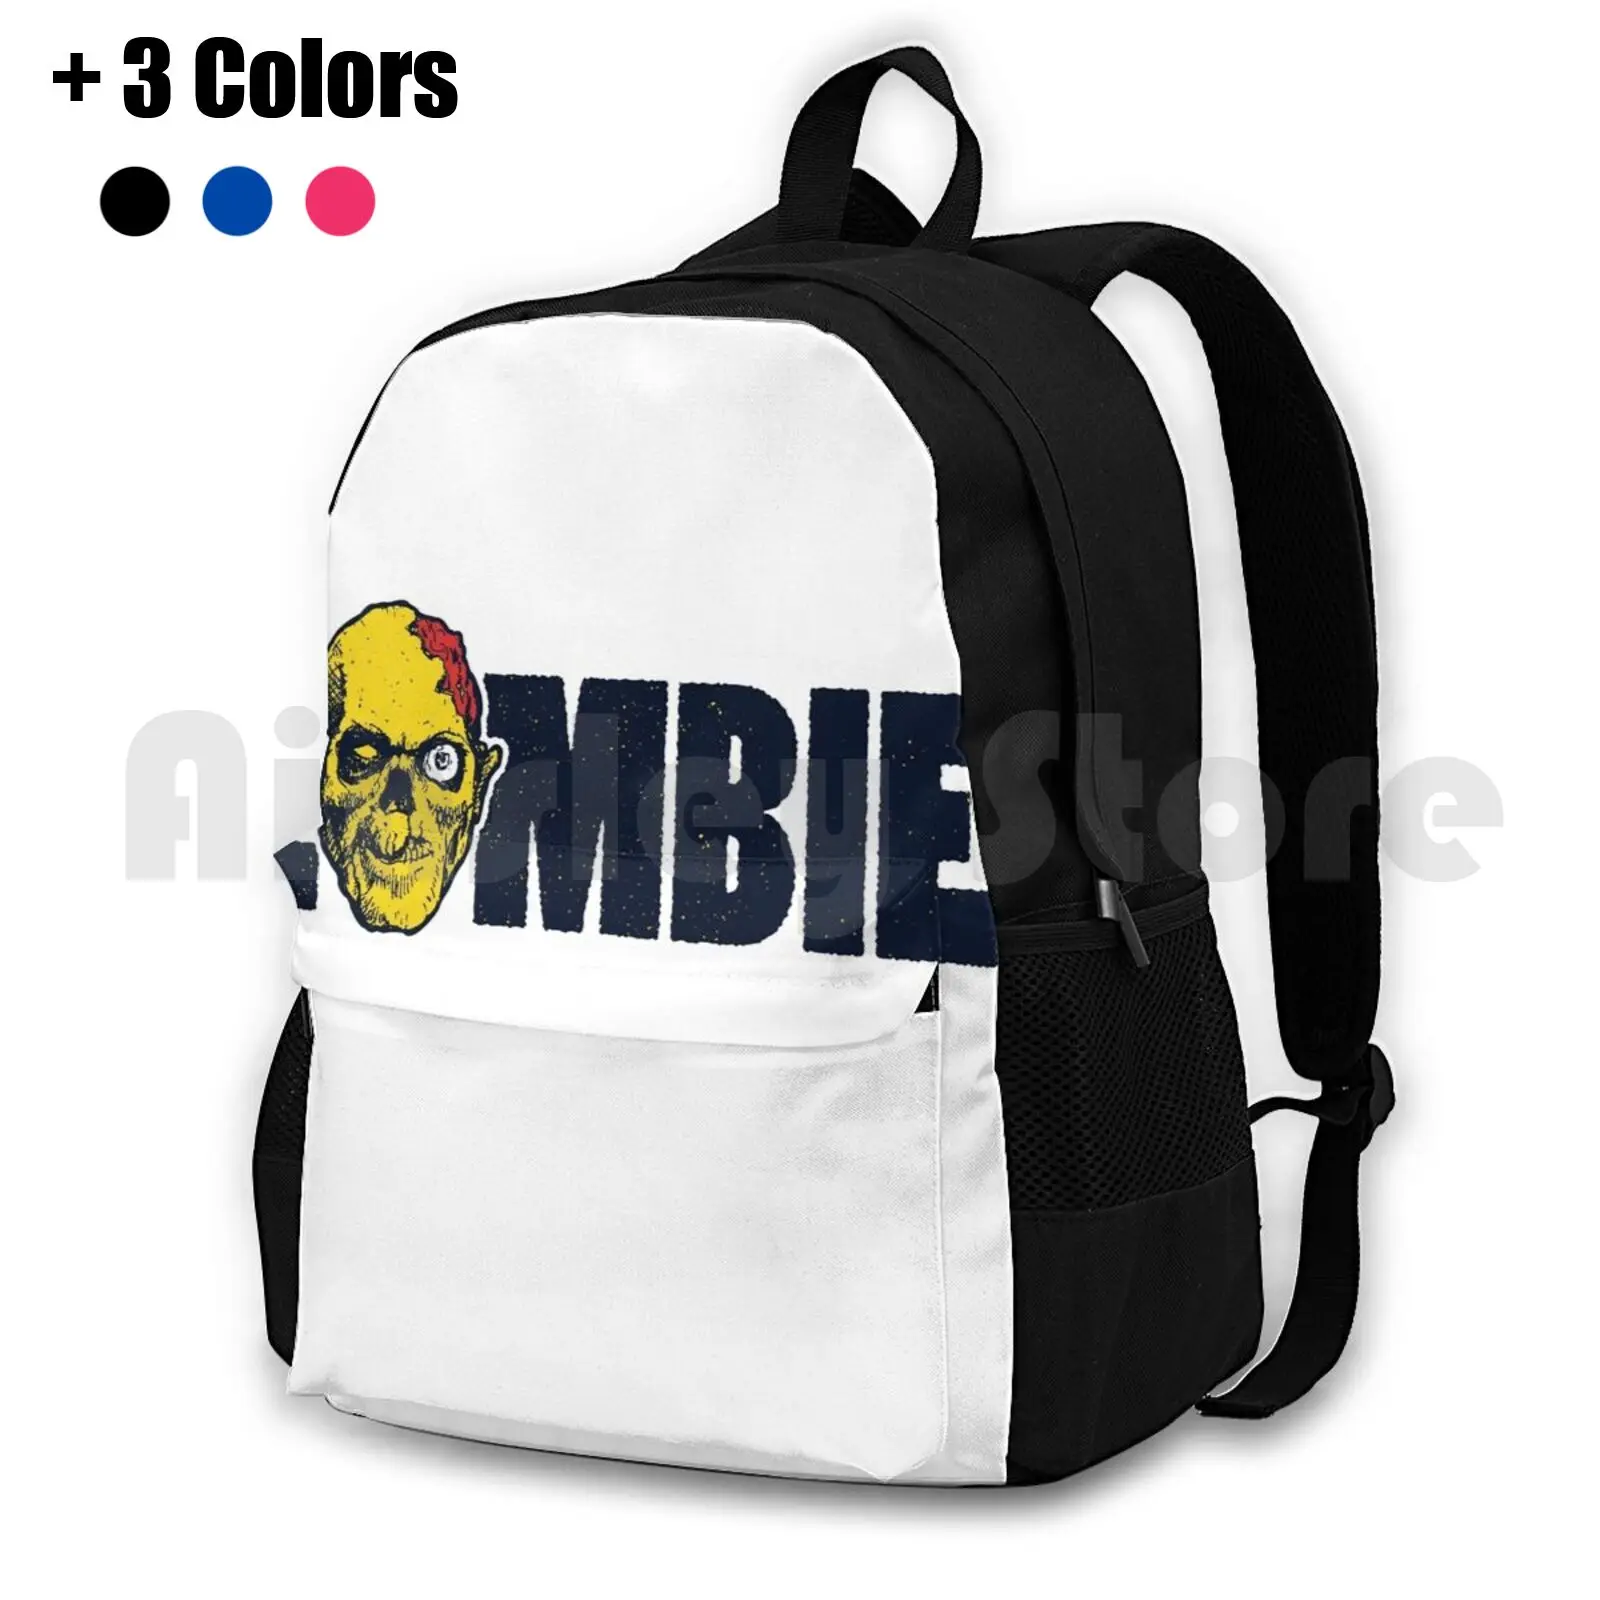 

Zombie Outdoor Hiking Backpack Riding Climbing Sports Bag Best Movies Best Selling Fantasy Movies Series Most Relevant